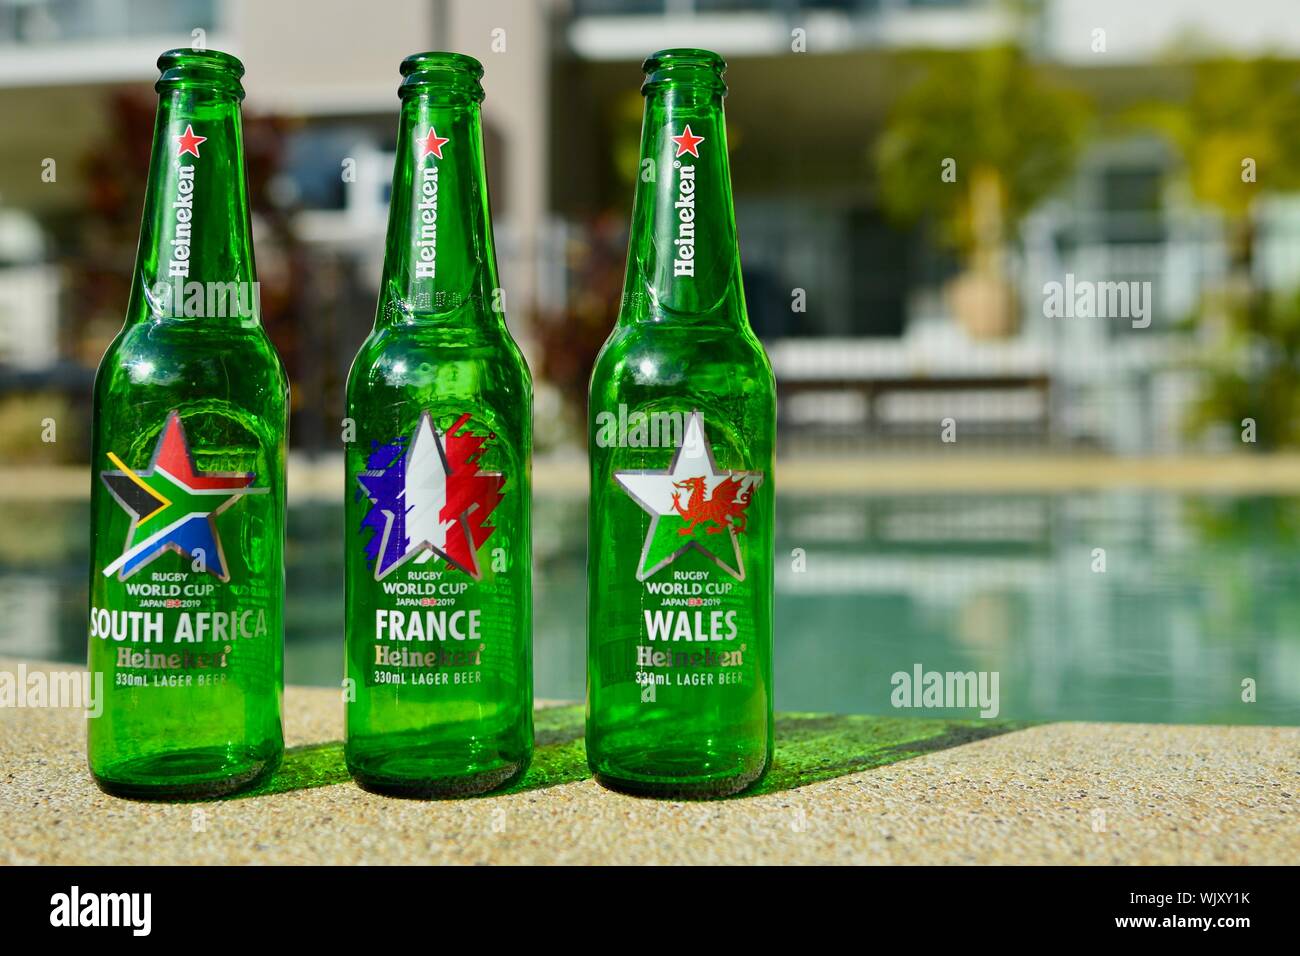 South Africa, France and Wales, Heineken 2019 Japan Rugby world cup beer bottles Stock Photo